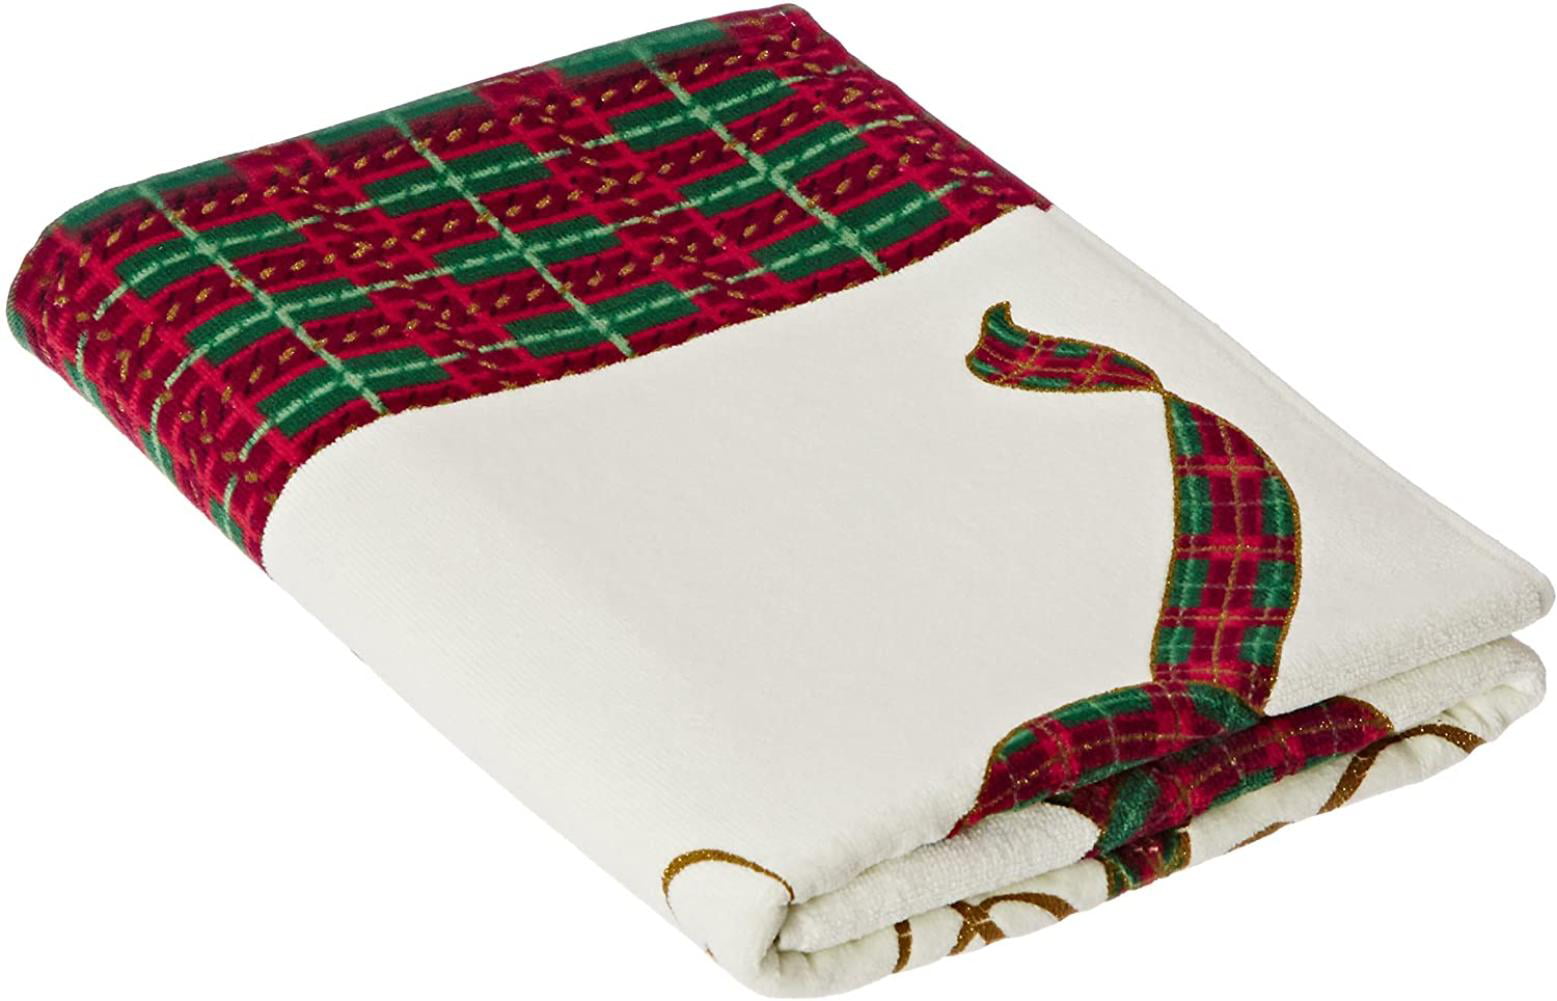 New 4 Piece Set Of Lenox Holiday Cotton Christmas Holly Berry Hand Towel Set 